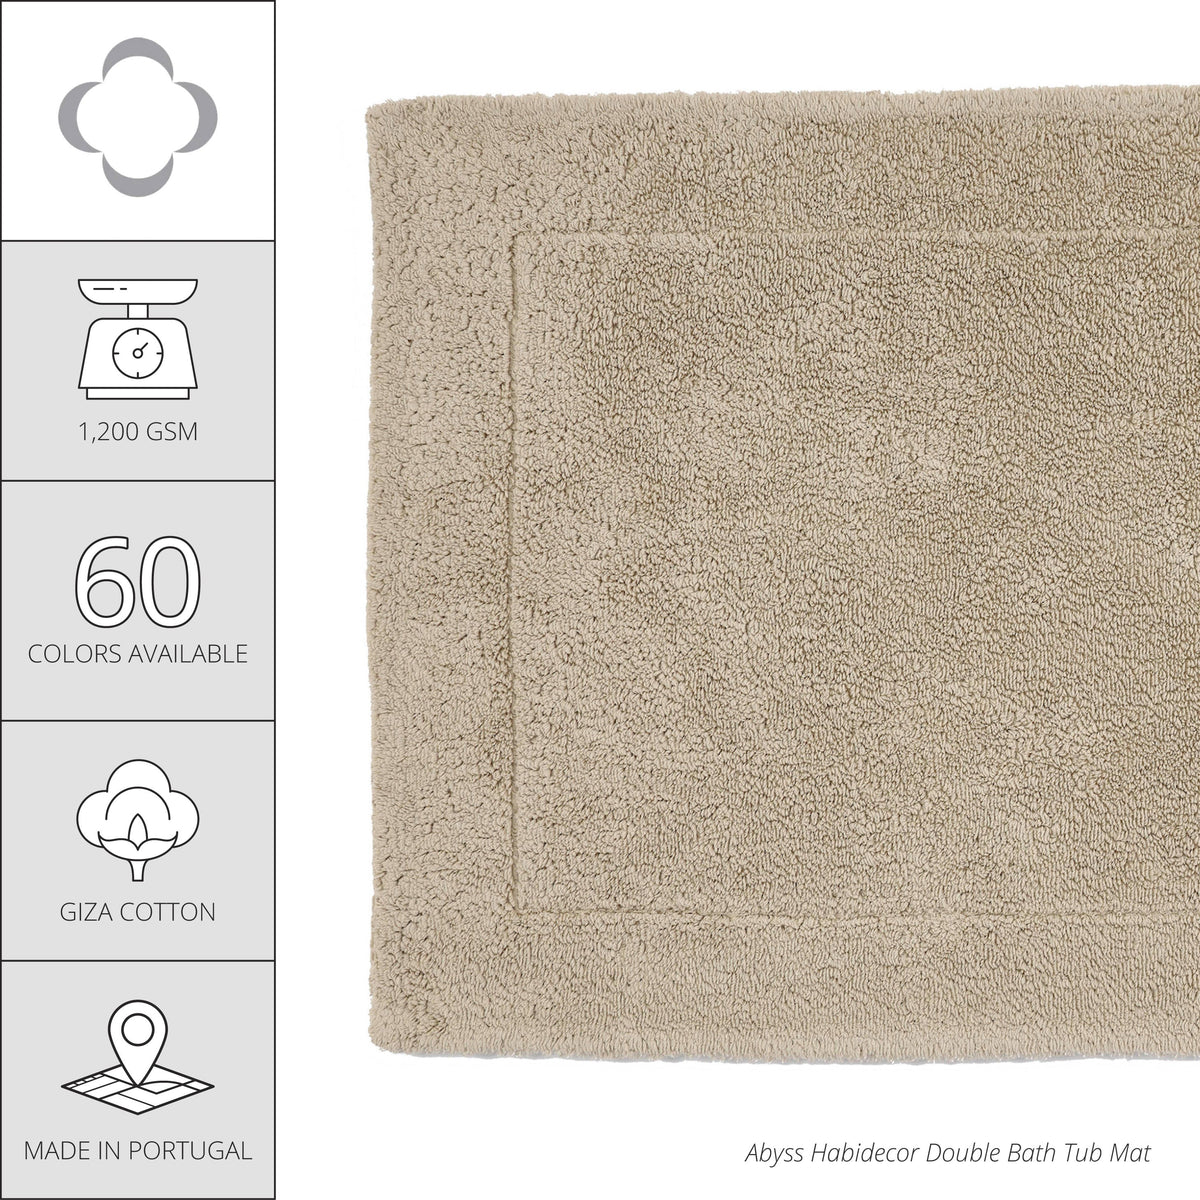 Abyss Double Bath Tub Mat with Infographic